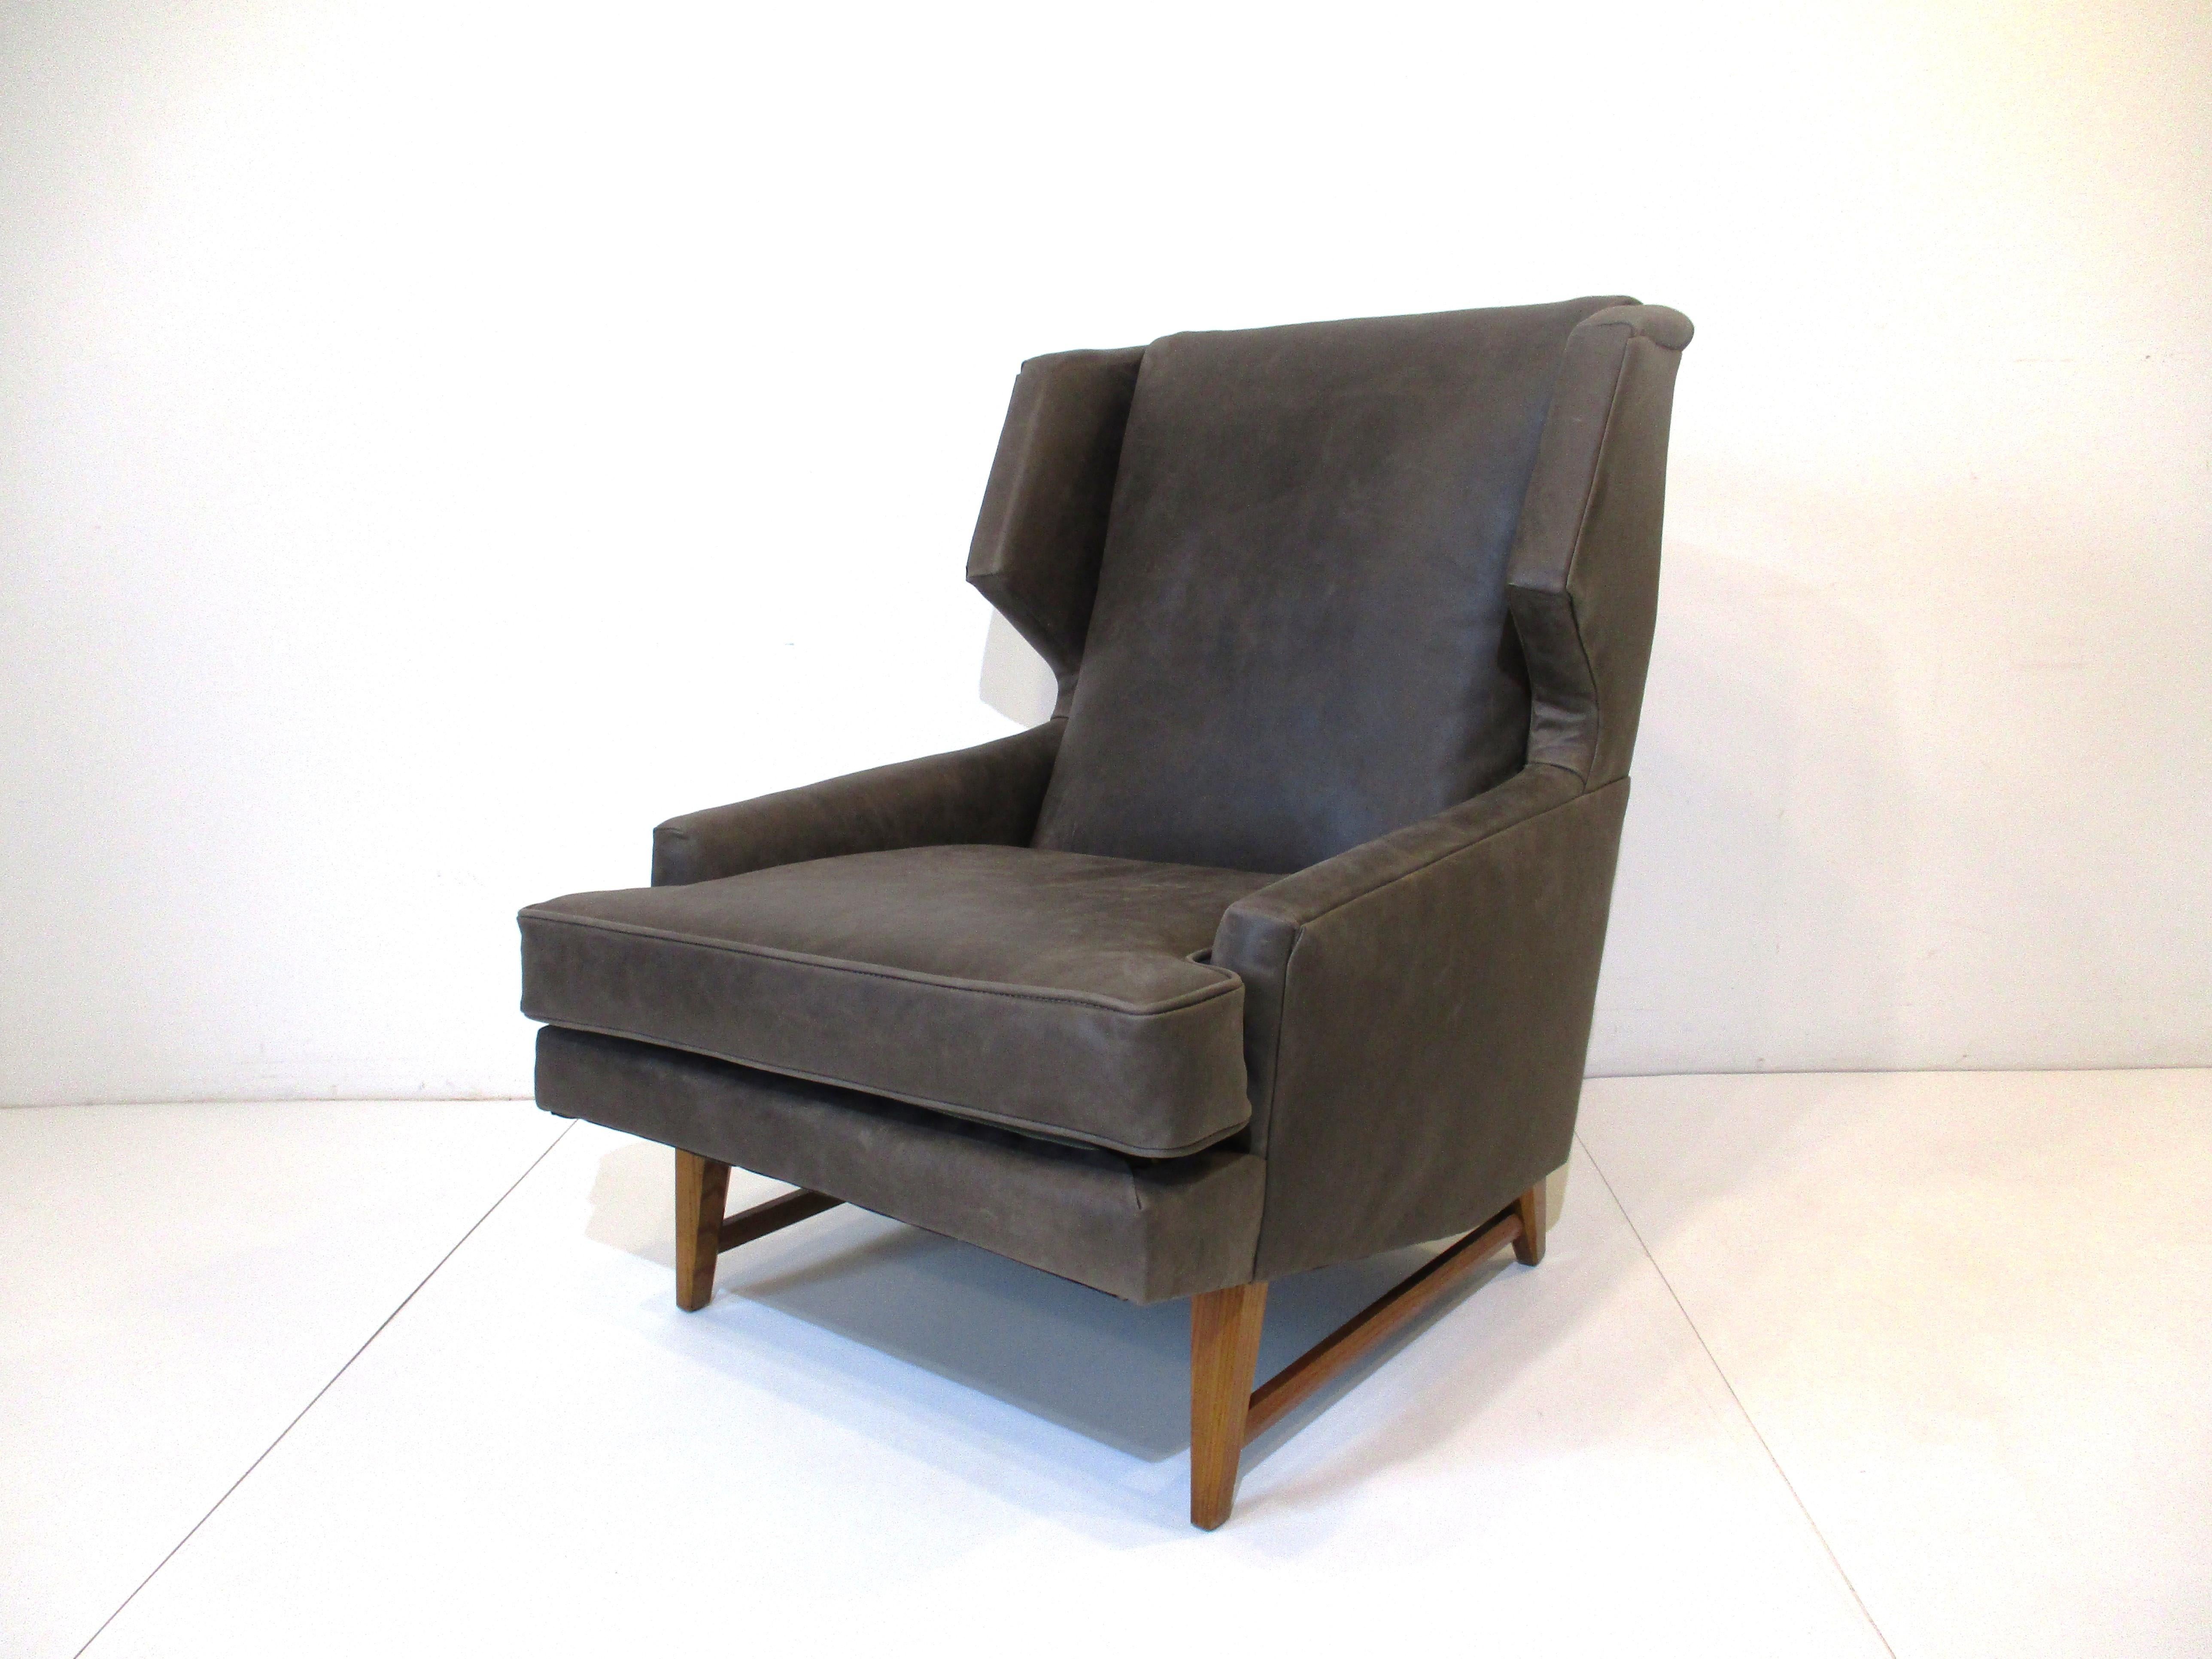 A midcentury wingback styled lounge chair restored in a distressed natural grige colored soft leather. The wood legs and strechers have beveled details giving the chair a nice tailored look mixing with the distressed warm leather. Designed in the